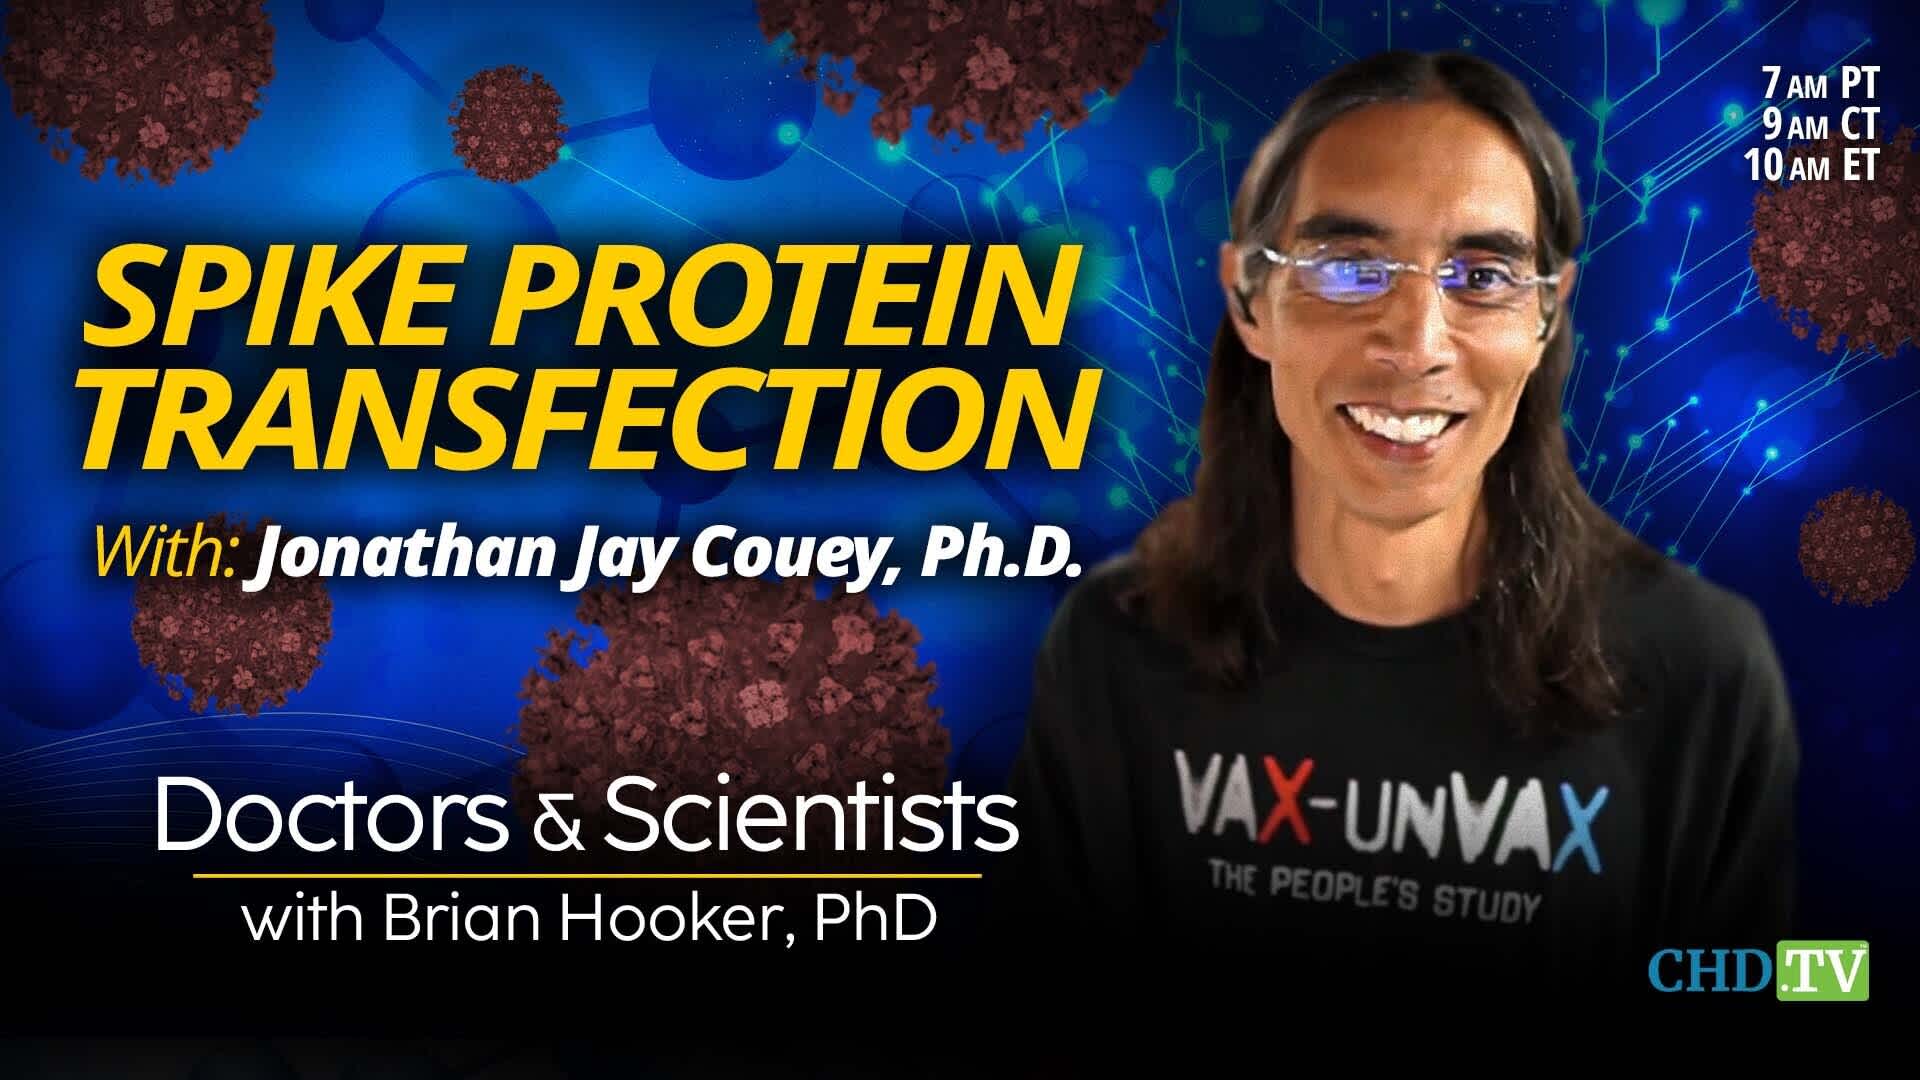 Spike Protein Transfection With Jonathan Jay Couey, Ph.D.